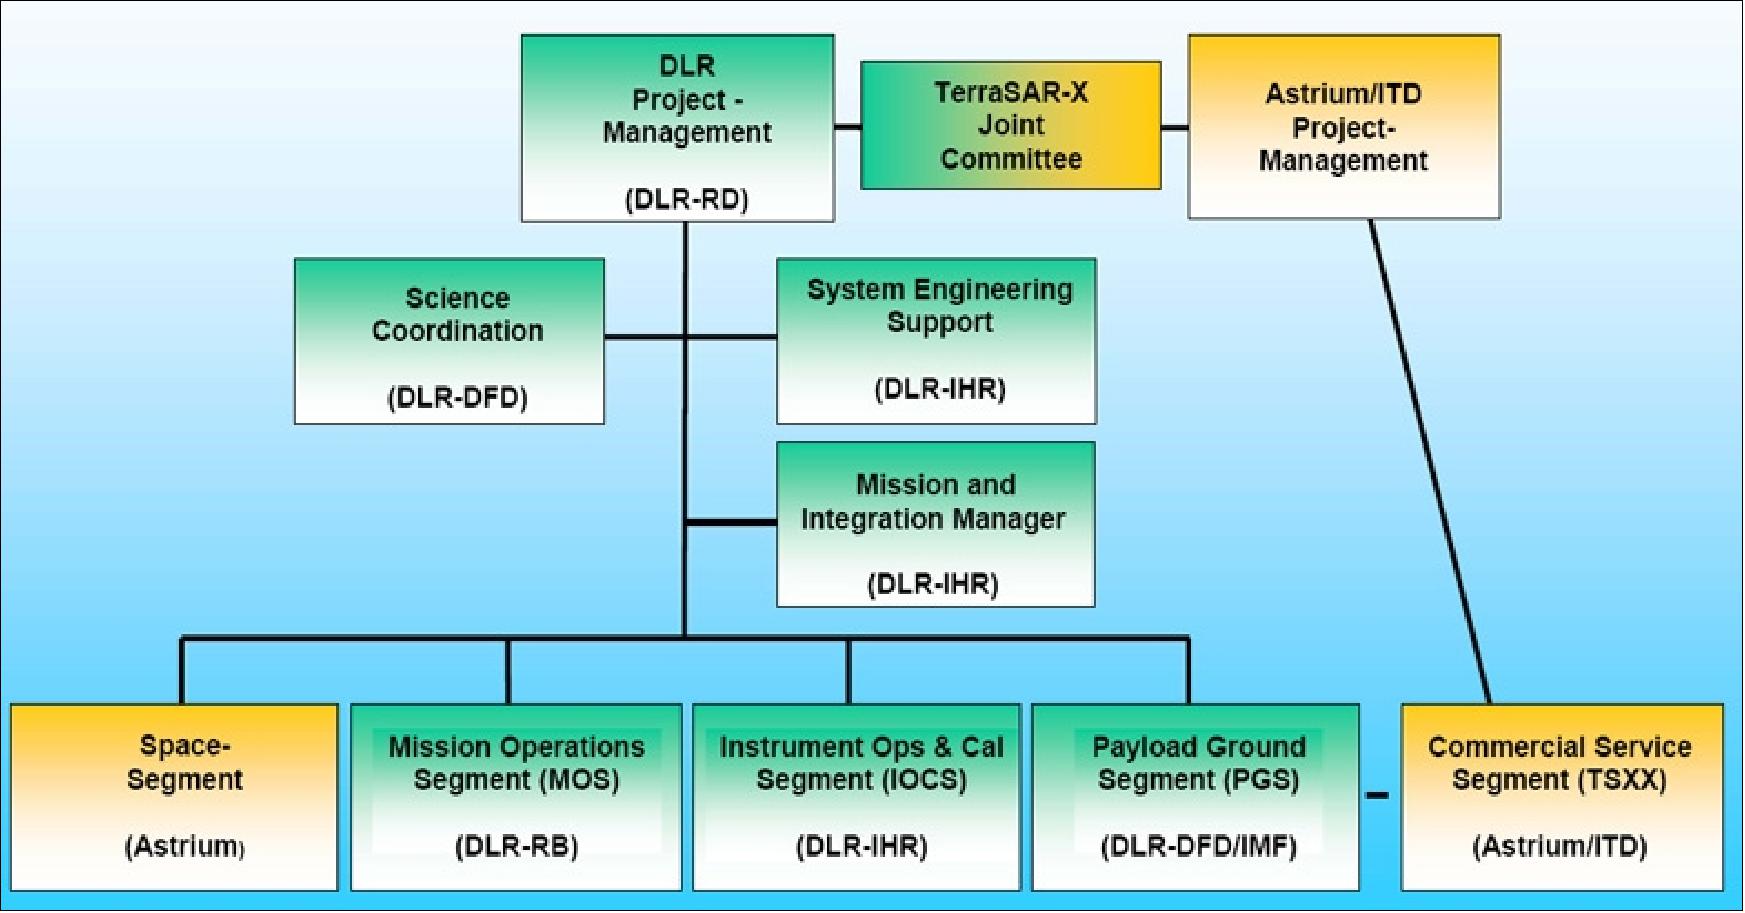 Figure 76: TerraSAR-X project structure and task allocations (image credit: DLR)